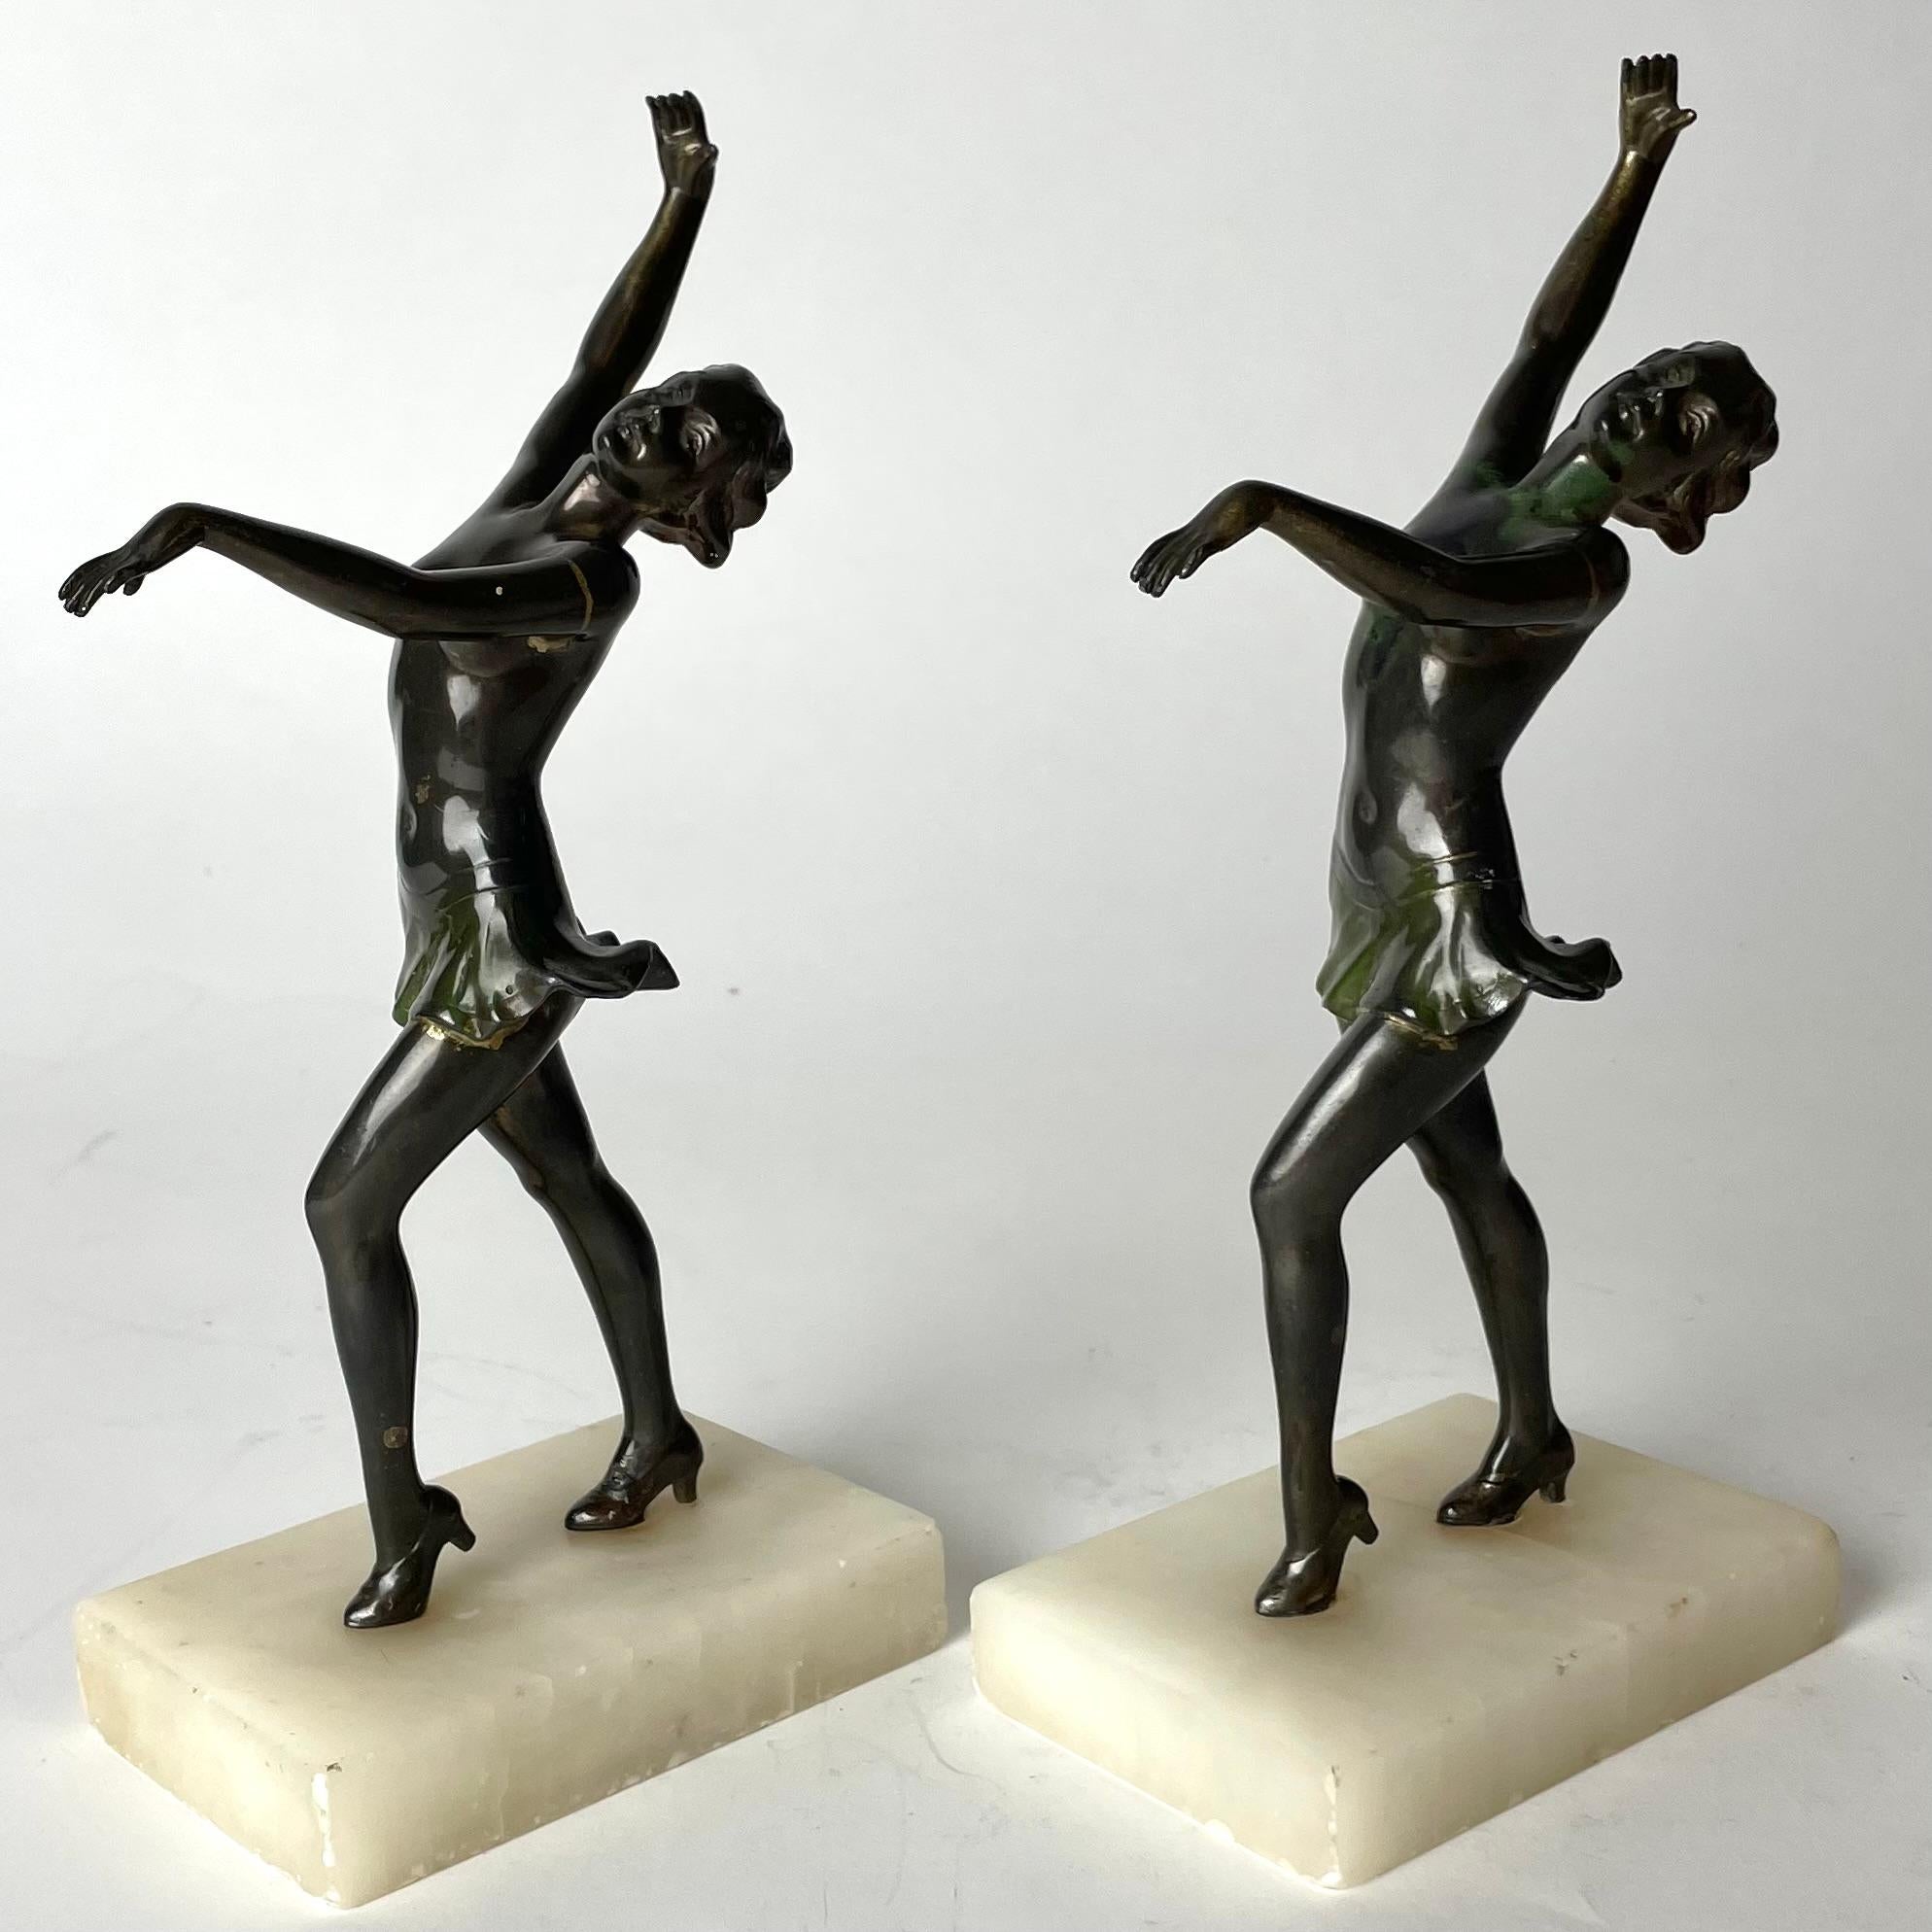 Bronzed A pair of period Art Deco Bookends from 1920s-1930s with dancing women.